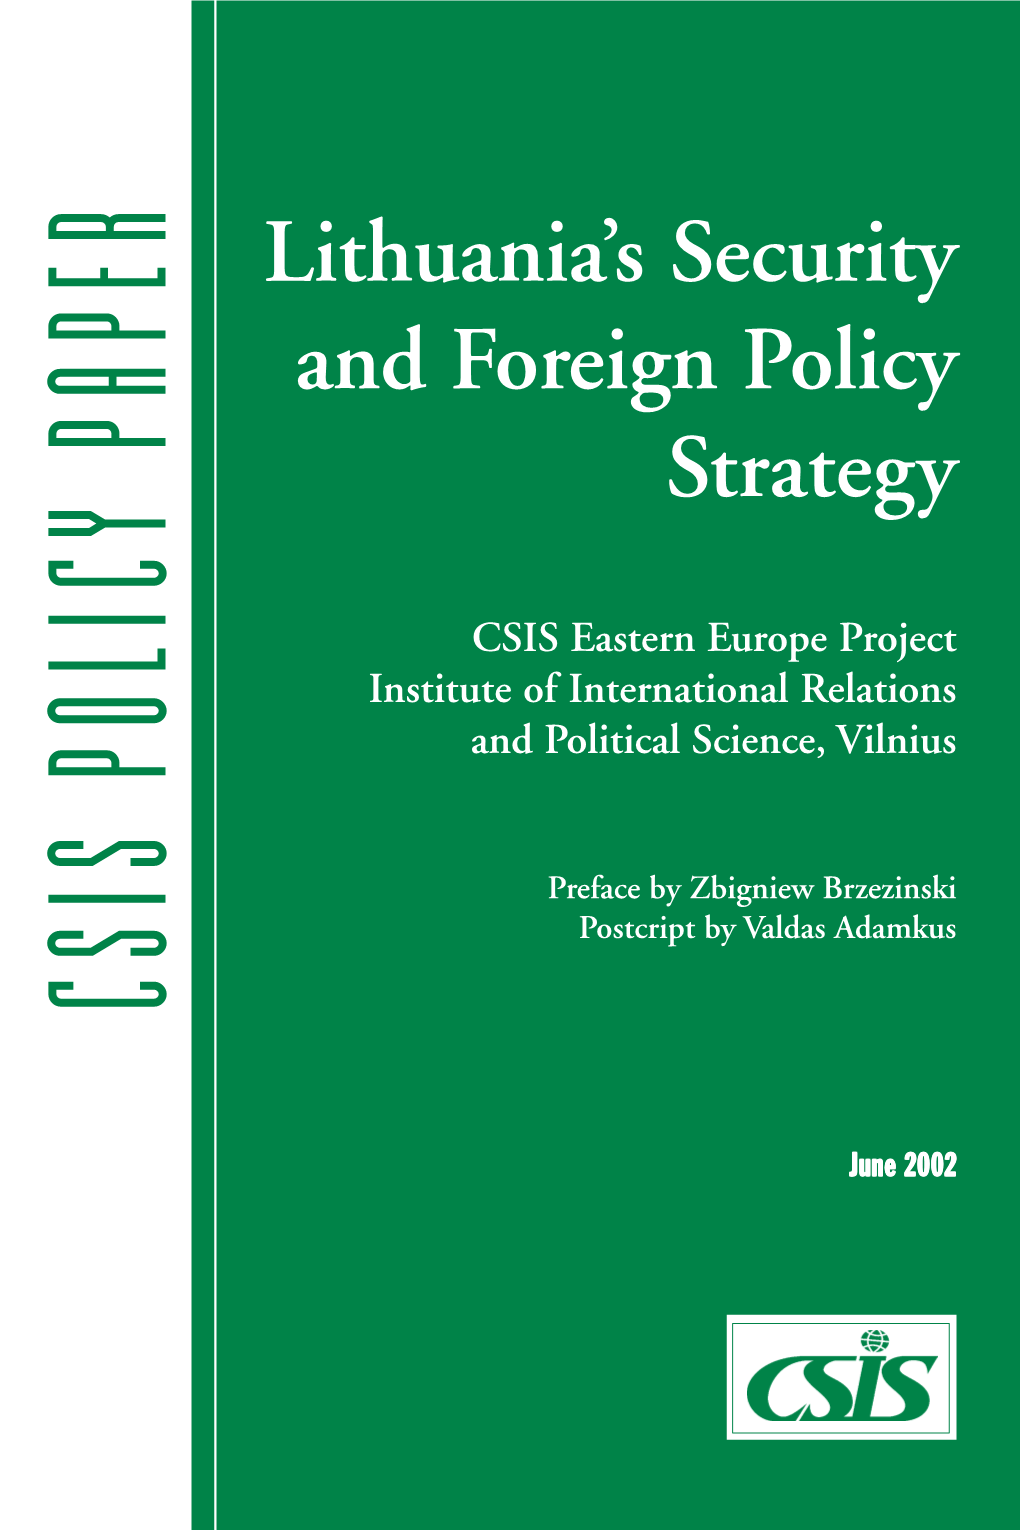 Lithuania's Security and Foreign Policy Strategy